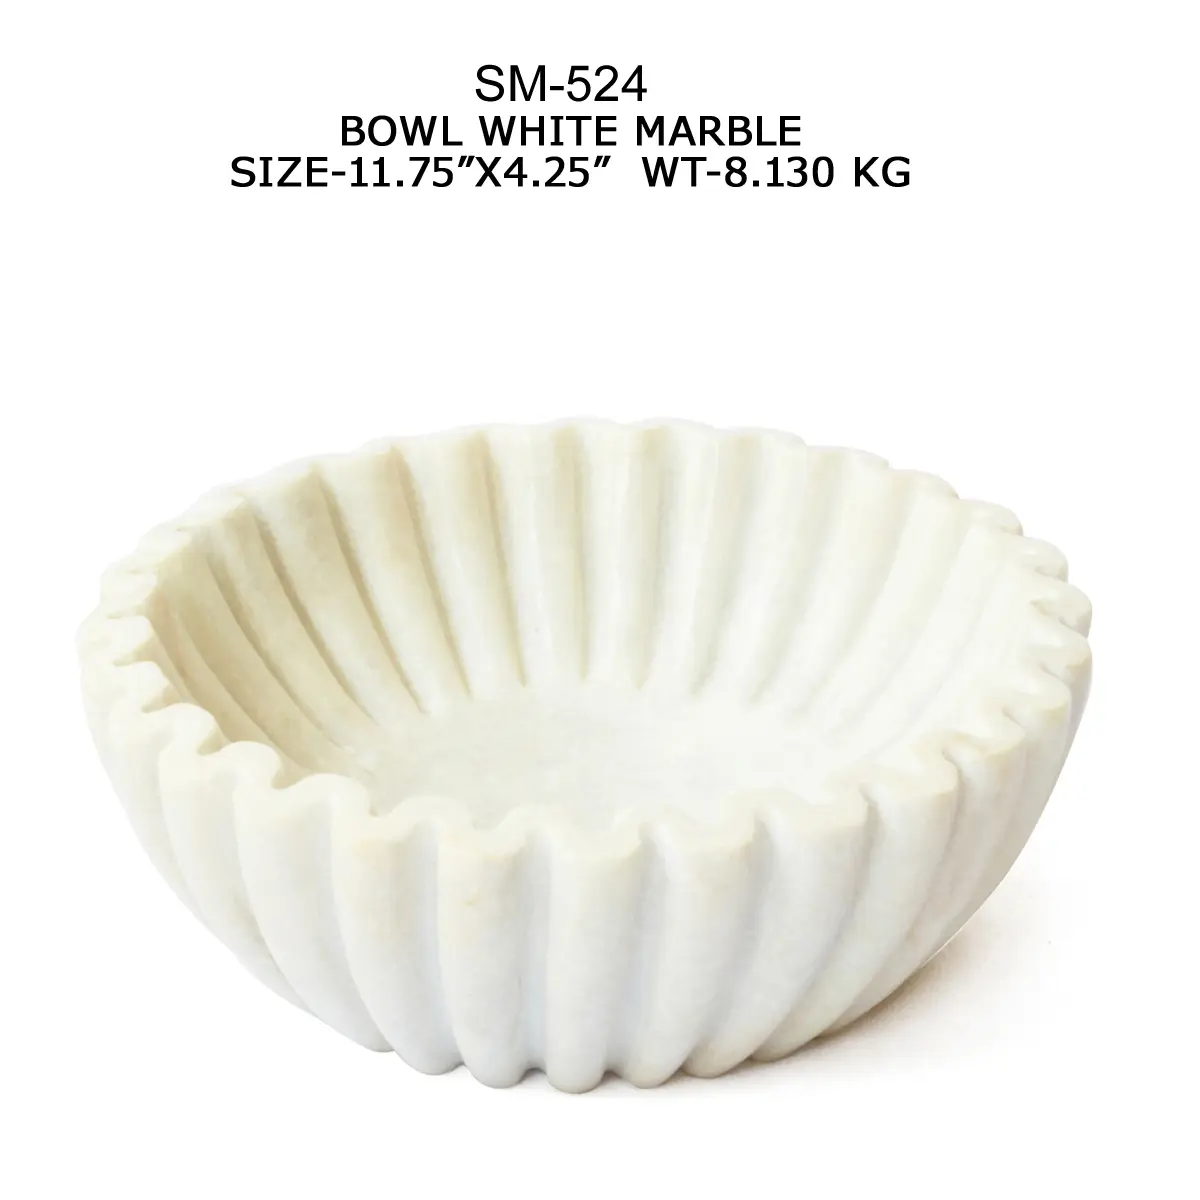 SCALLOPED MARBLE BOWL LARGE SIZE
IN WHITE MARBLE